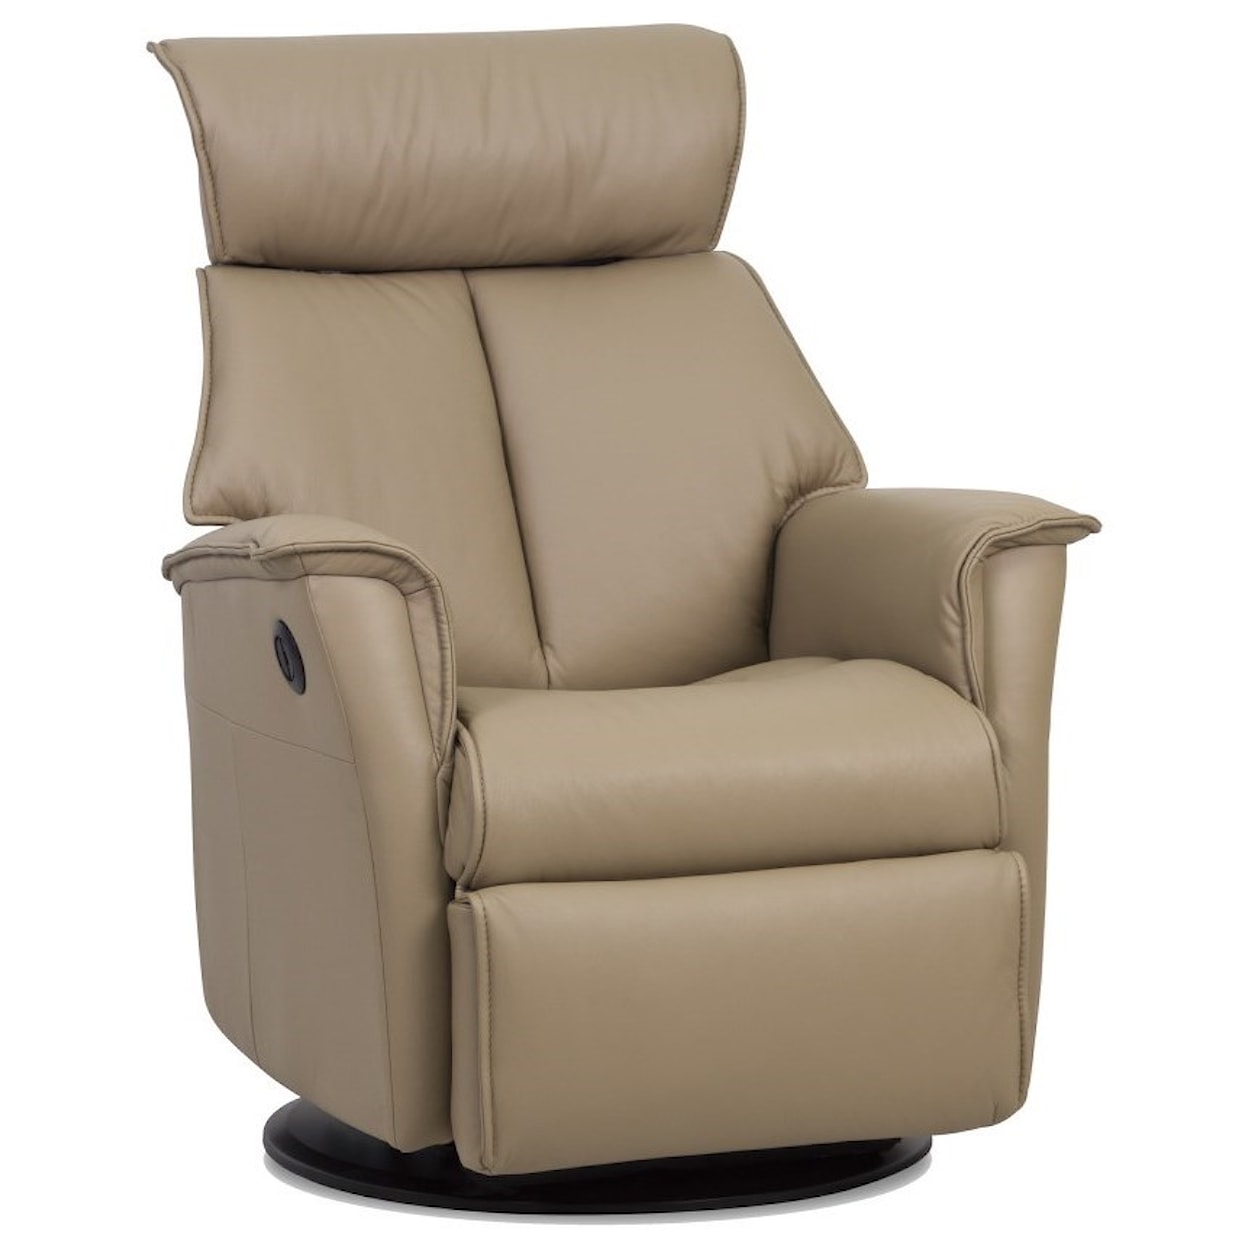 IMG Norway Boss Large Power Recliner